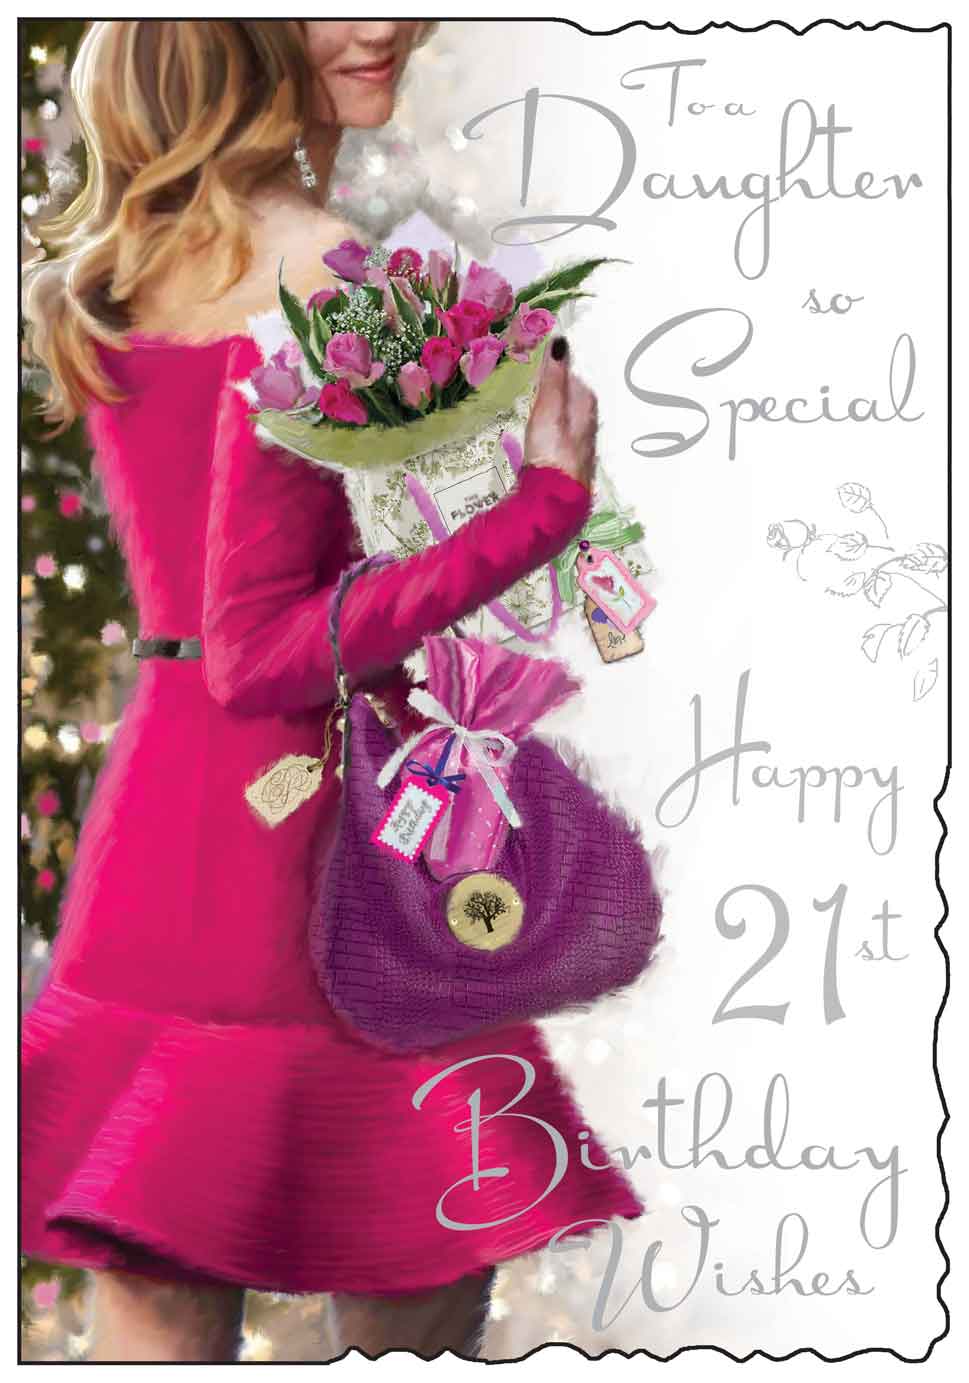 21st Daughter Birthday Card - Beautifully Dressed And Flowers For The Occasion